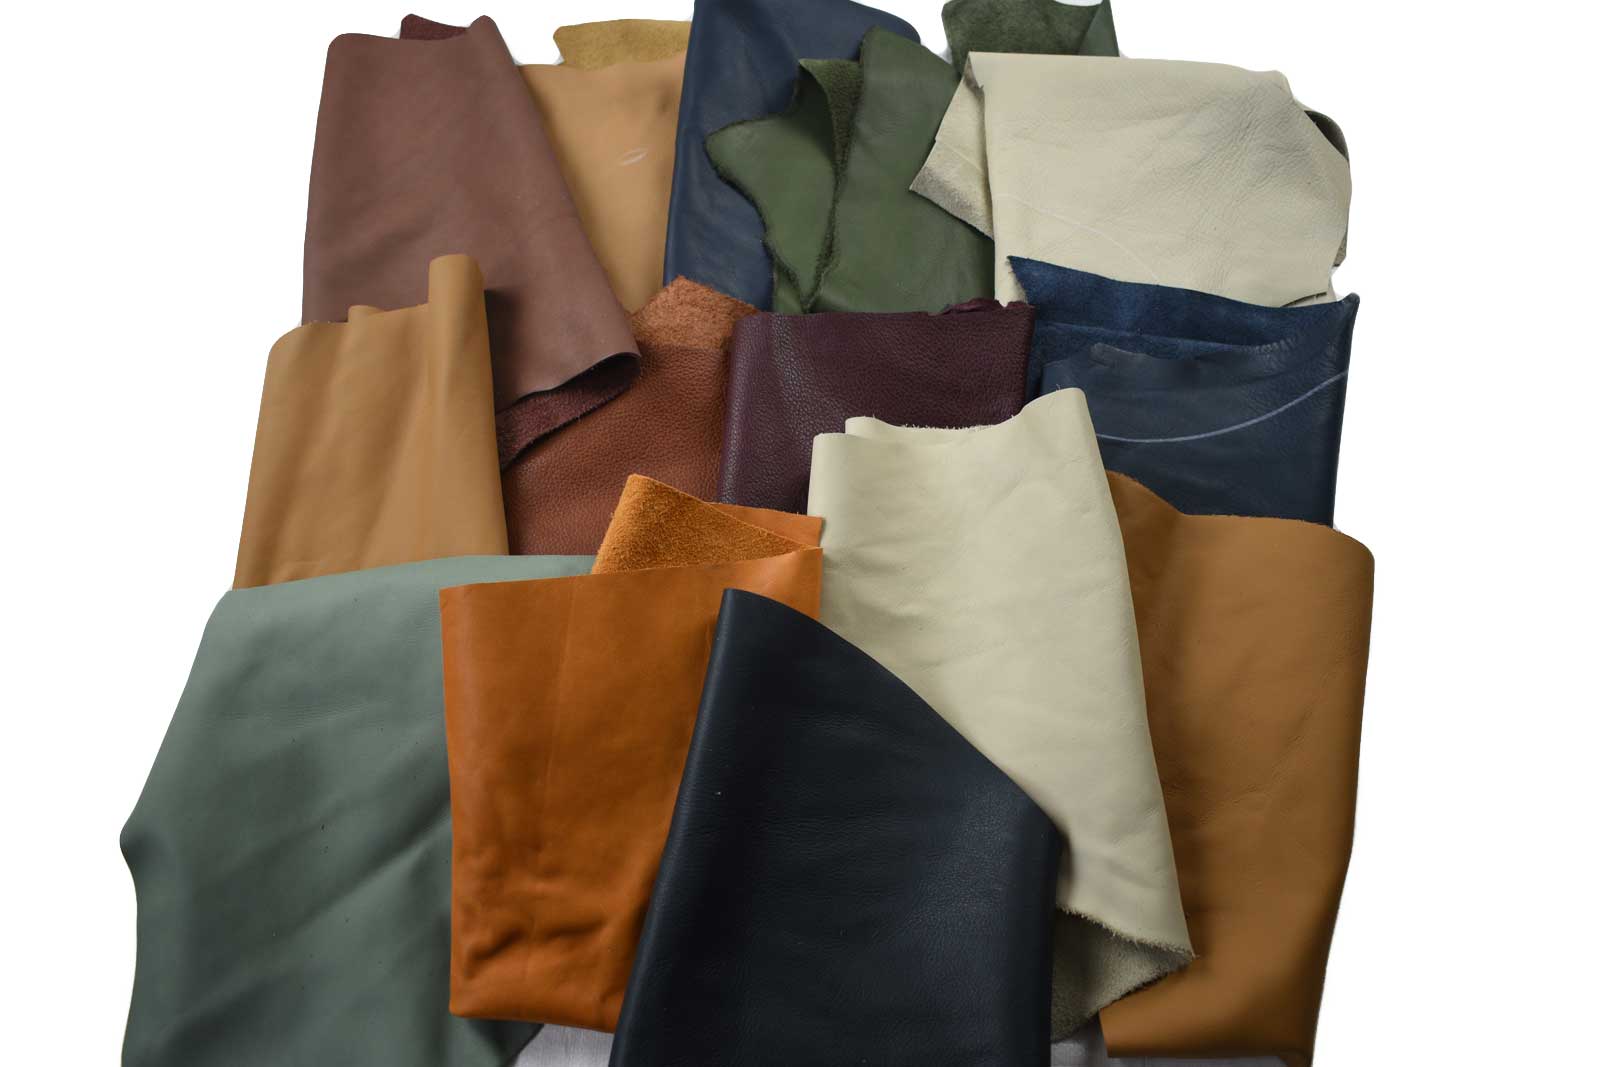 Upholstery leather scraps  1/2 sqft - Assorted Colour